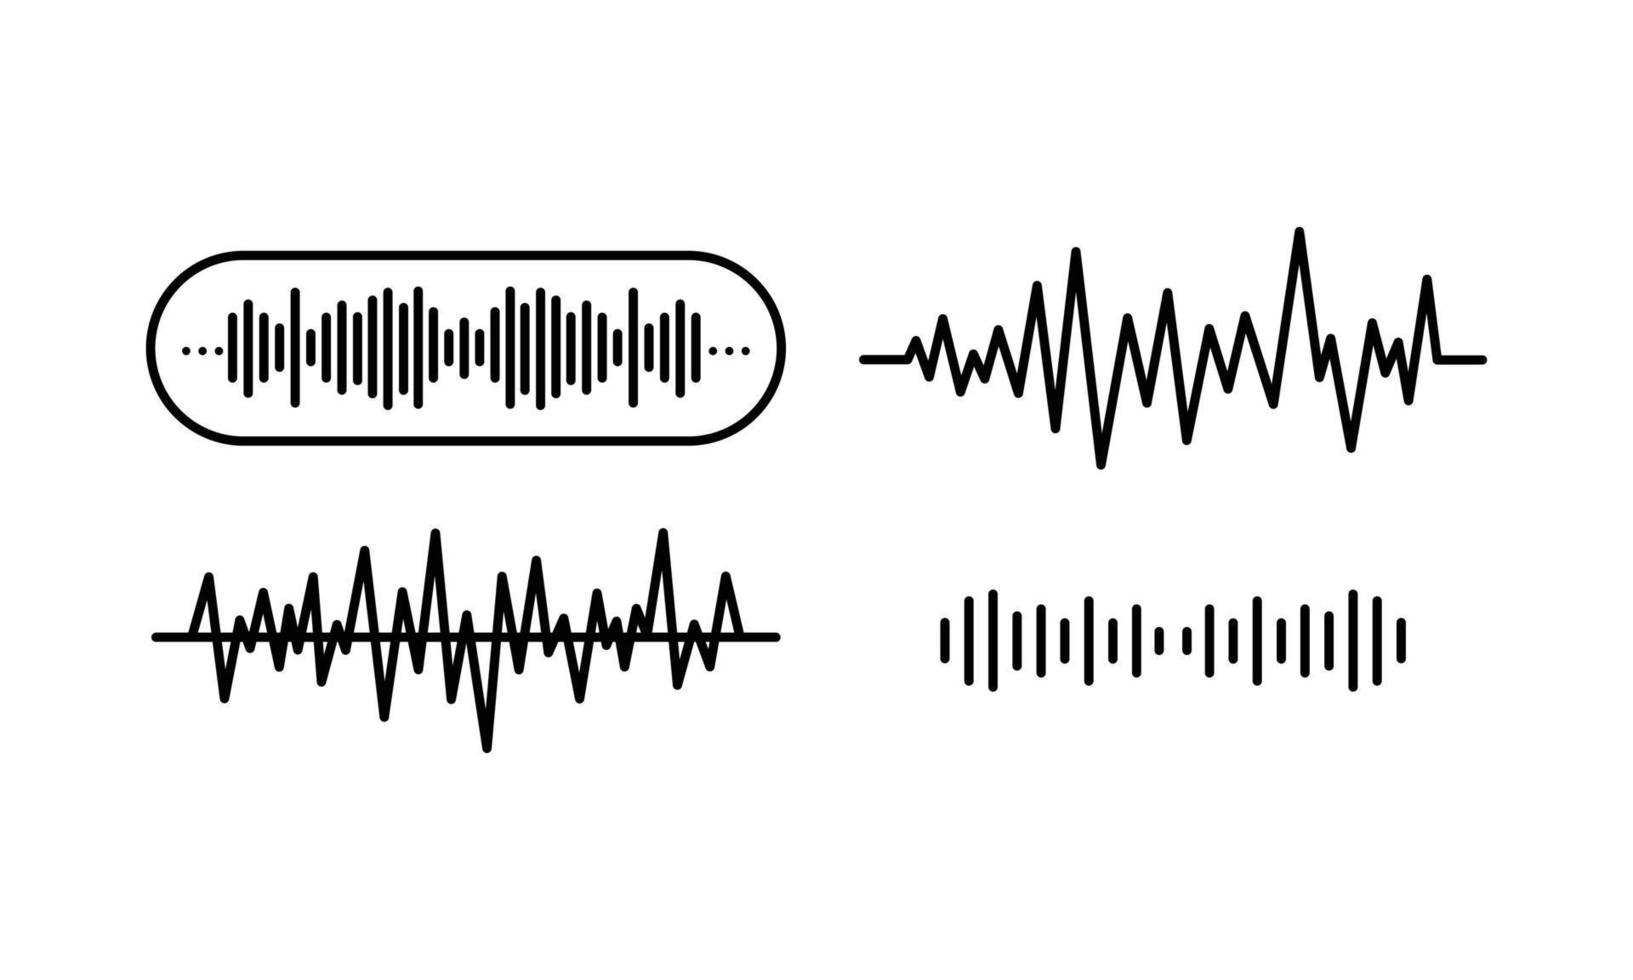 spectrum audio illustration. waveform of music and audio in vector graphic. any kind of sound wave line in simple design.